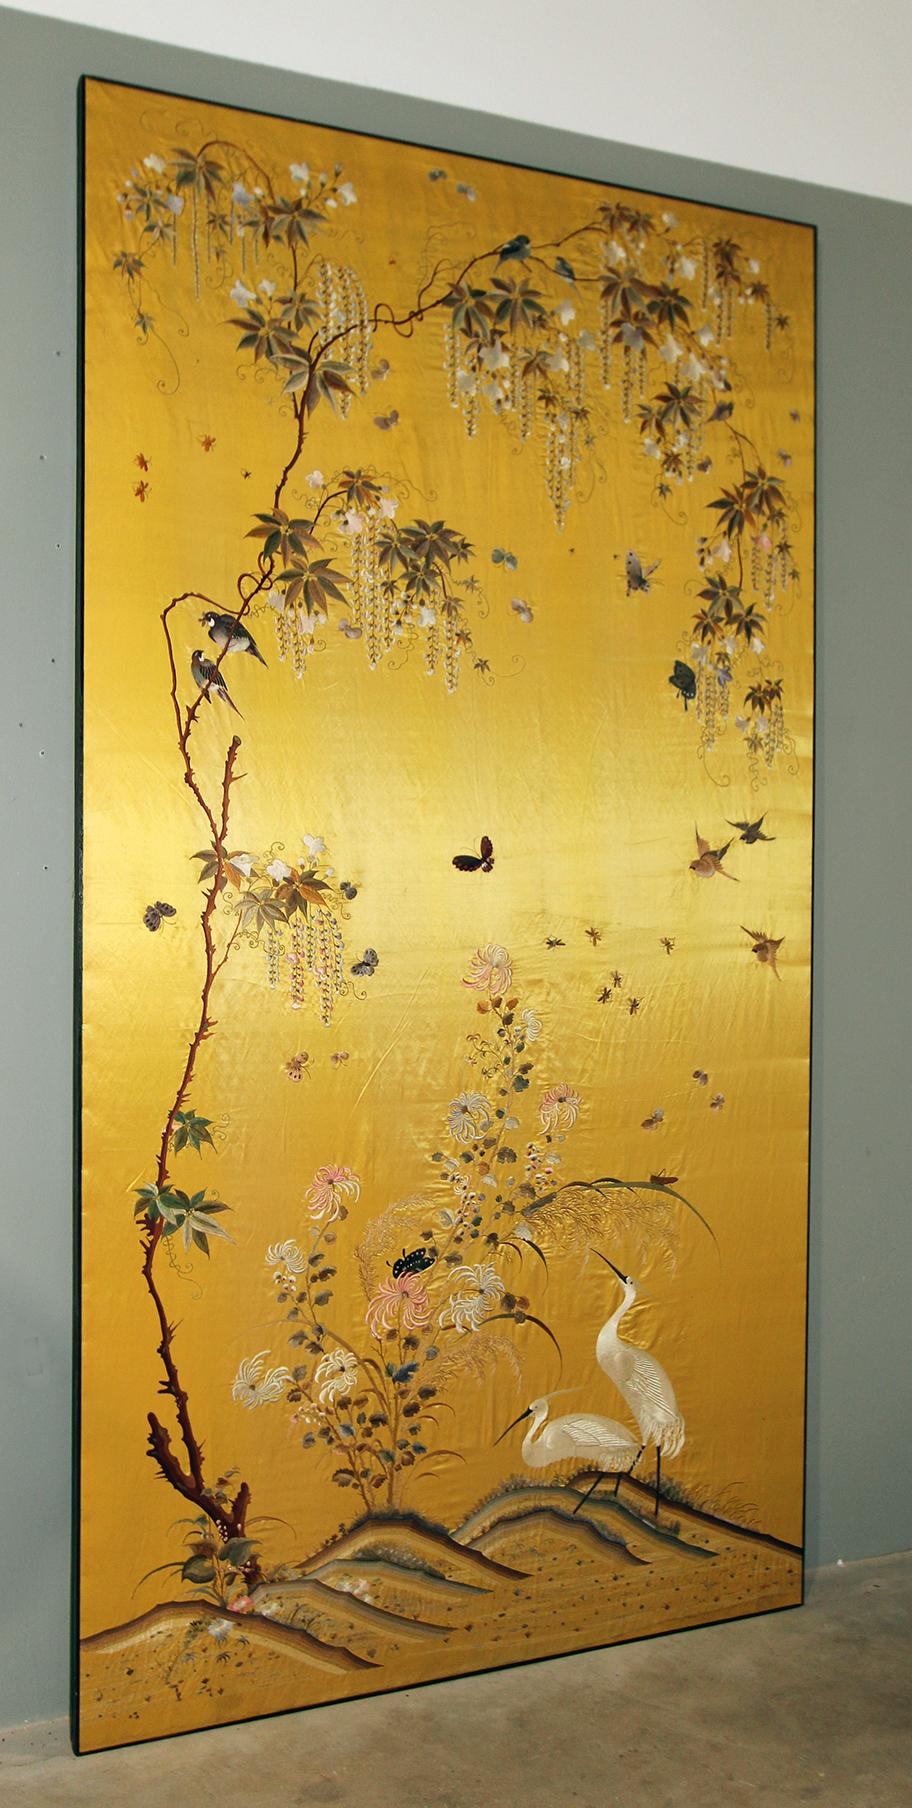 20th Century Silk Embroidered Herons under a Blooming Wisteria of Butterflies 1